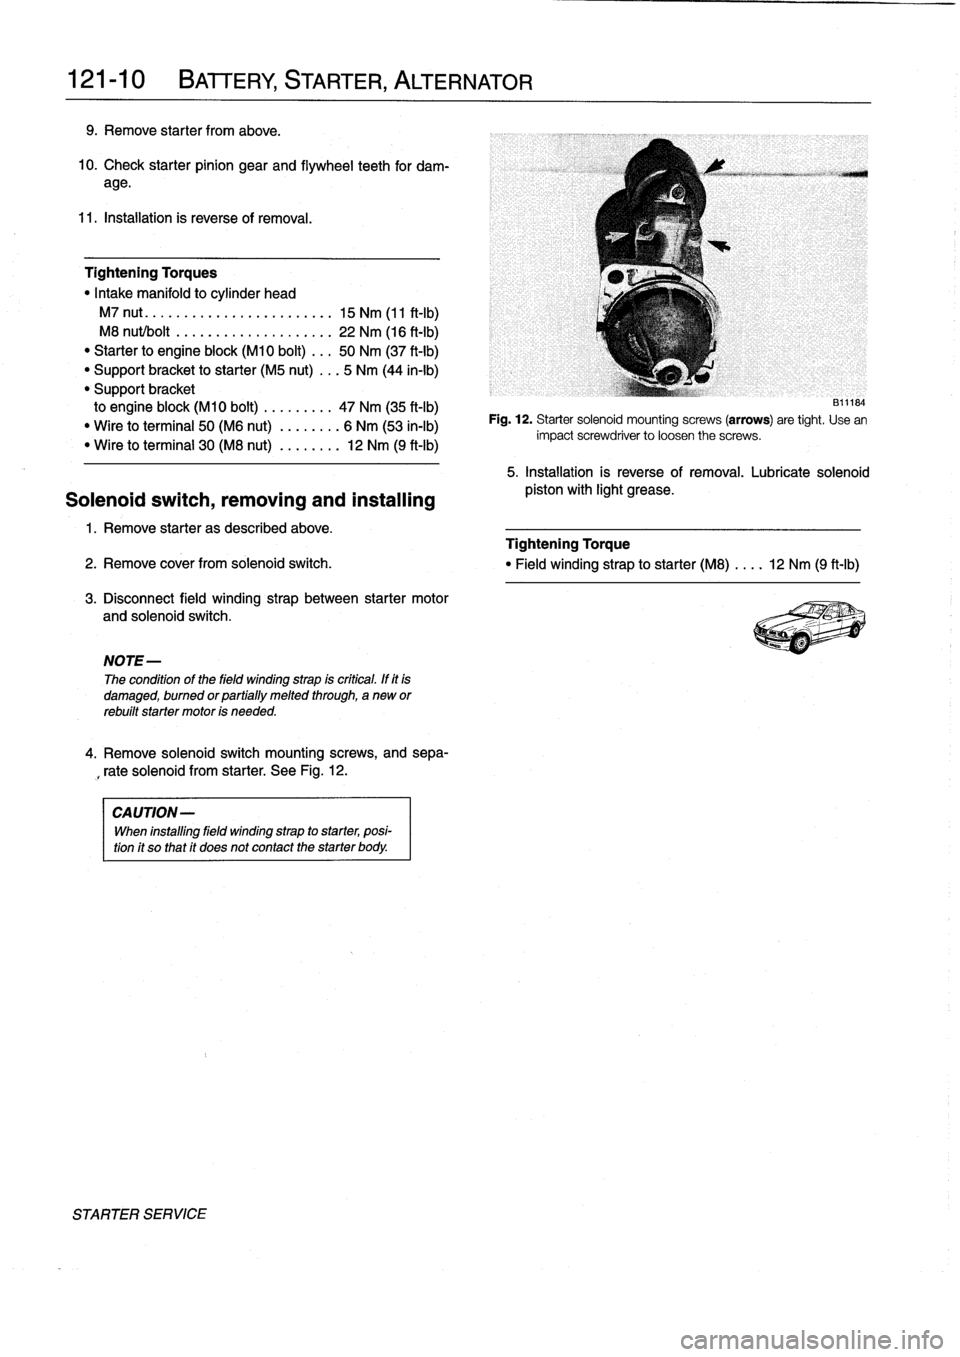 BMW 323i 1996 E36 Workshop Manual 
121-1
O

	

BATTERY,
STARTER,
ALTERNATOR

9
.
Remove
starter
from
above
.

10
.
Check
starter
pinion
gear
and
flywheel
teeth
for
dam-
age
.

11
.
Installation
is
reverse
of
removal
.

Tightening
Torq